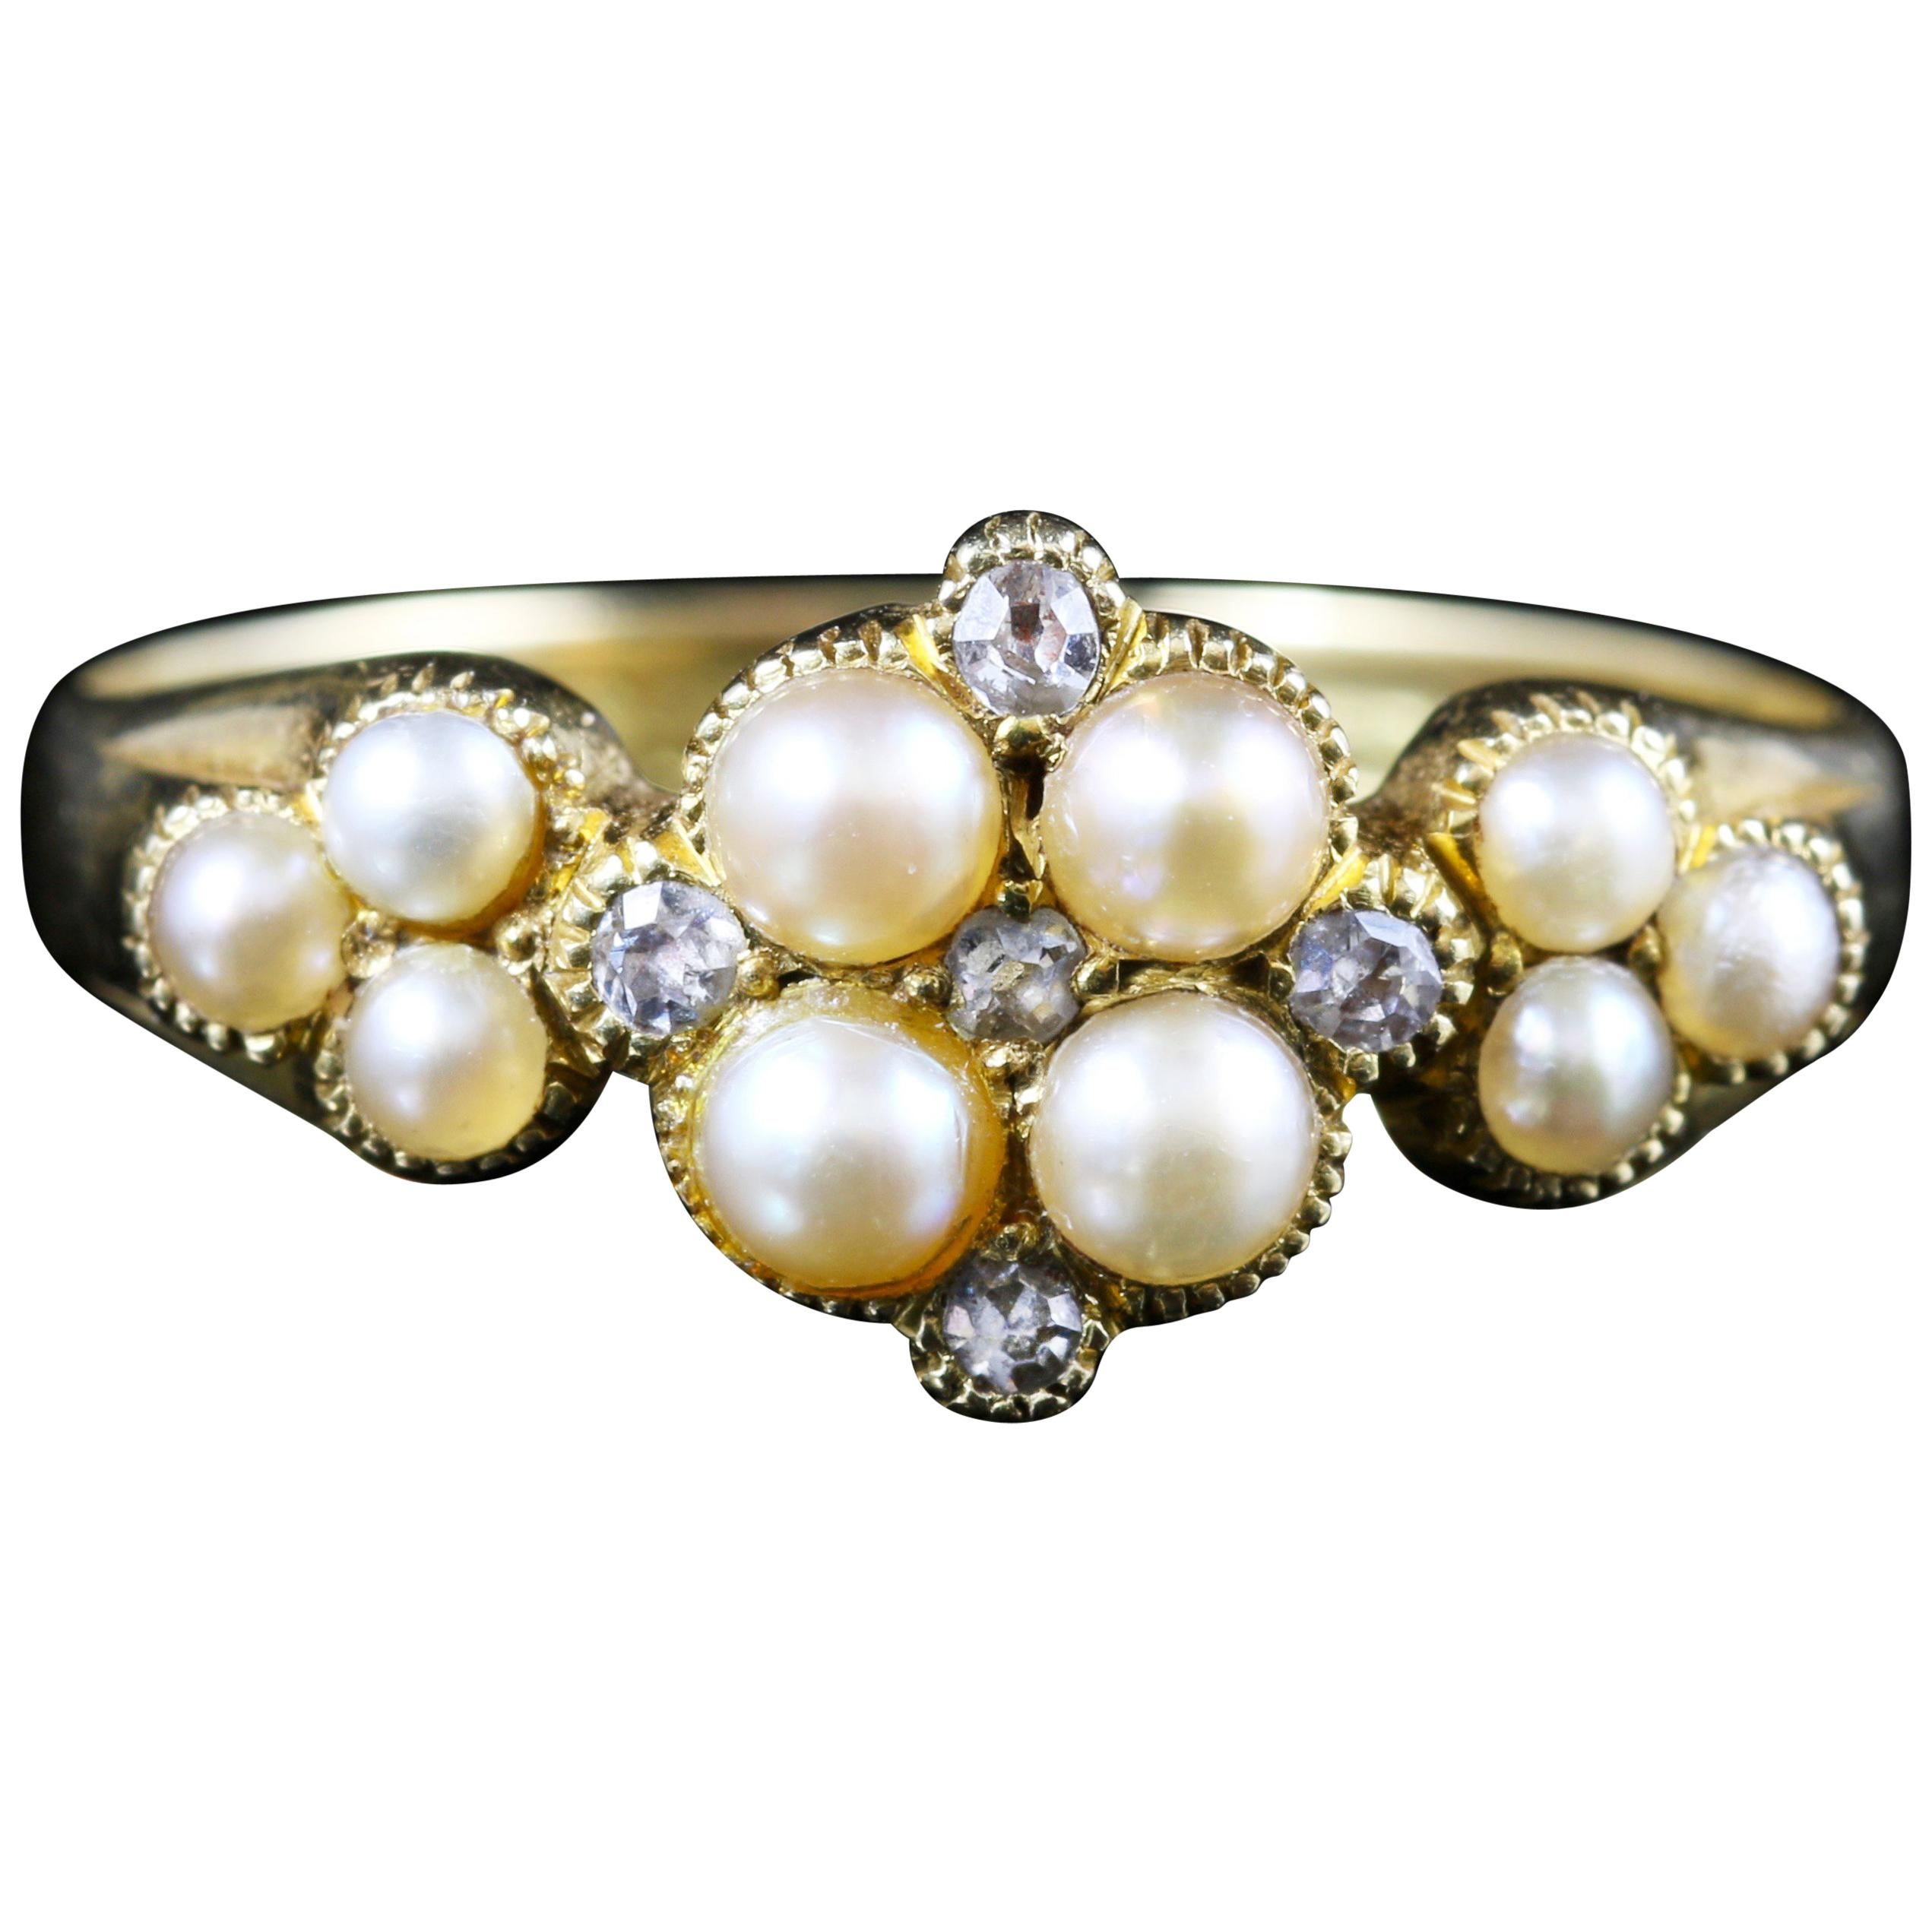 Antique Victorian Pearl and Diamond Ring 18 Carat Yellow Gold, circa 1860